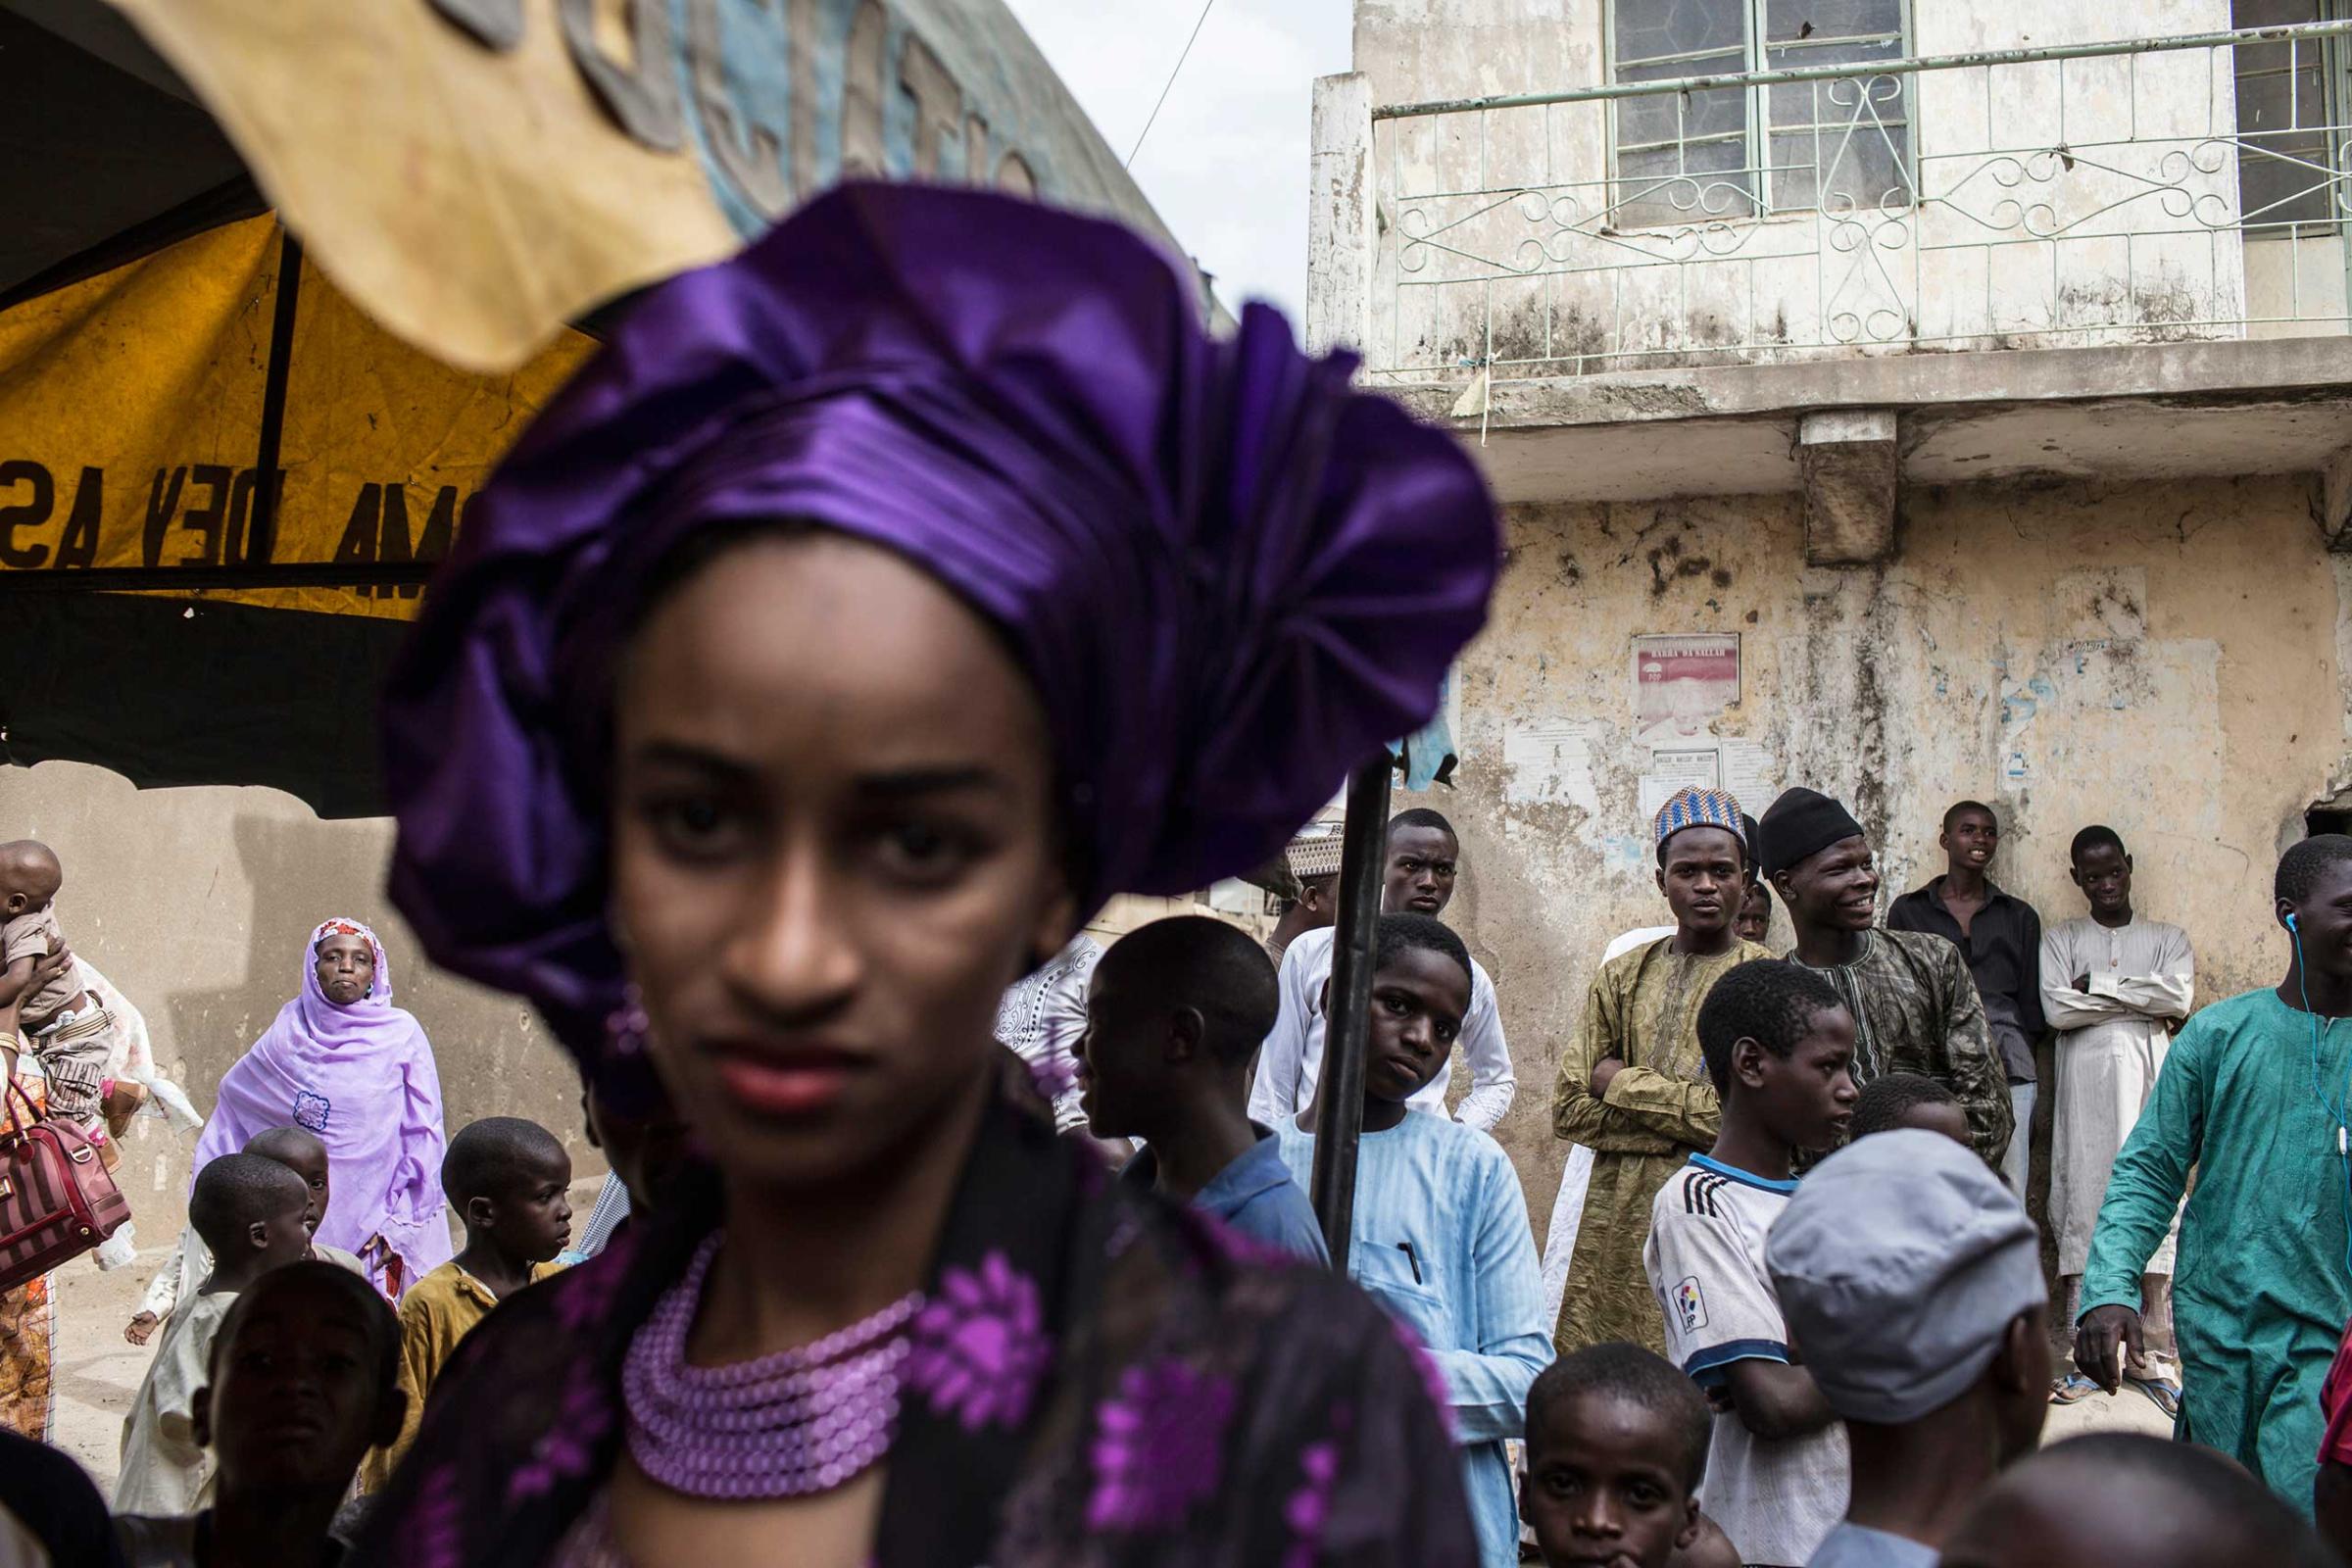 A bride at a wedding stands apart from the guests, Kano, Northern Nigeria. April 7, 2013.